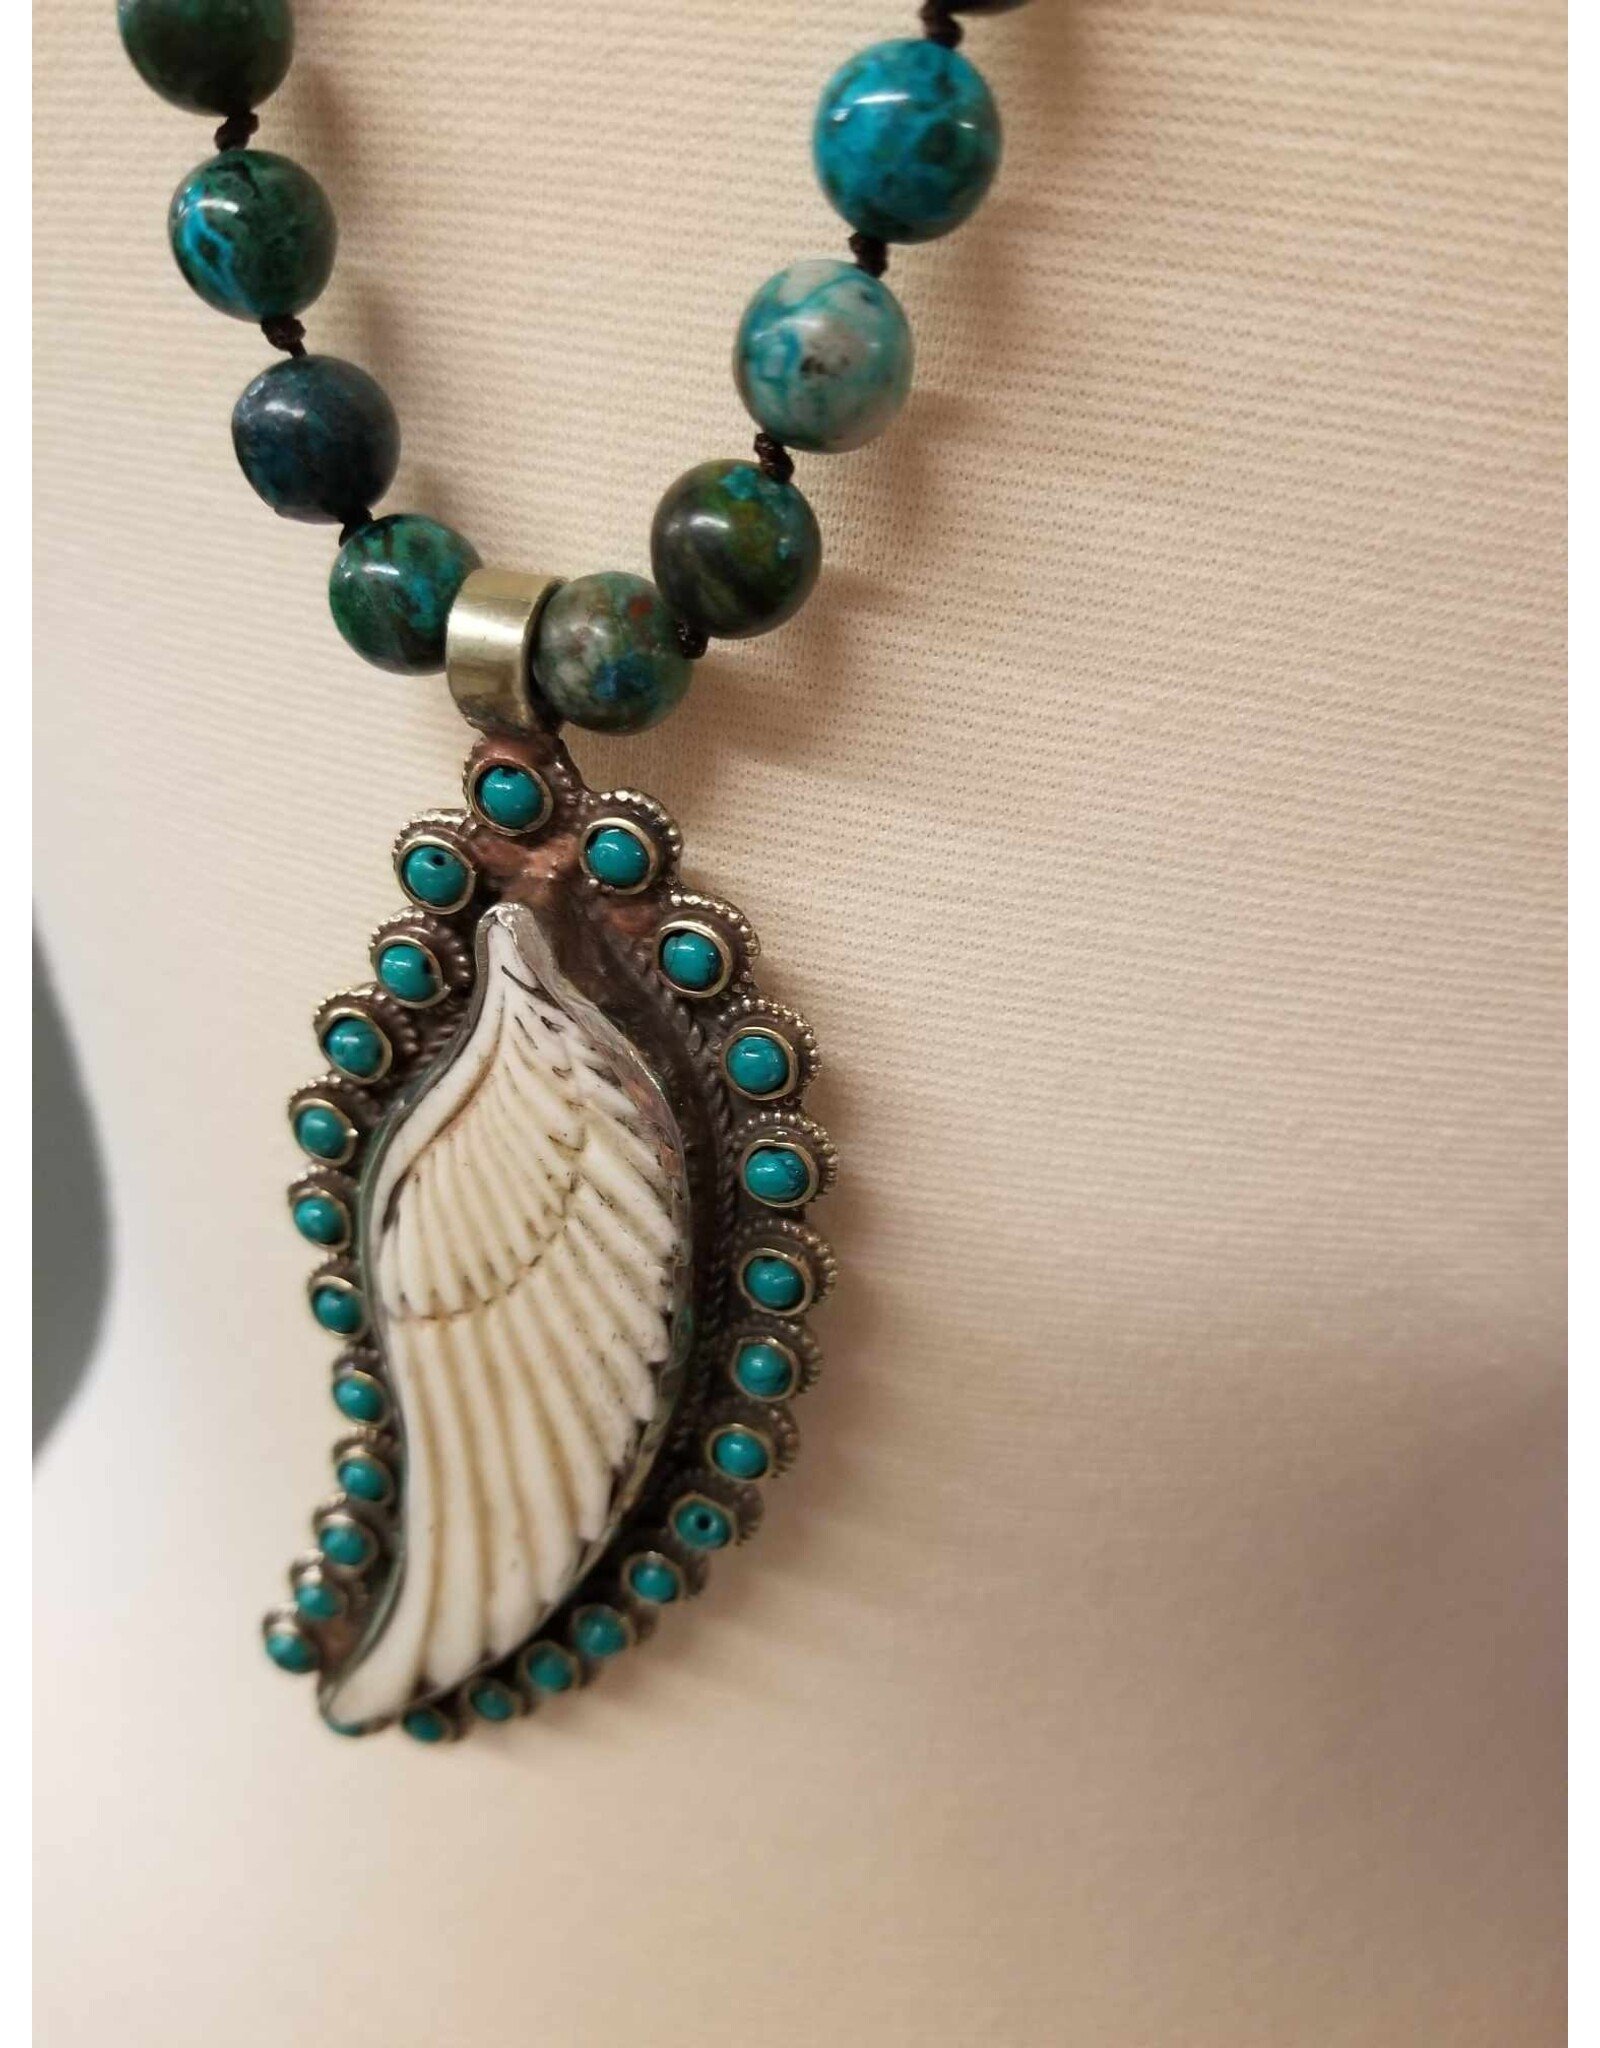 Erin Knight Design Vintage Carved Bone Feather Necklace with Turquoise Chain